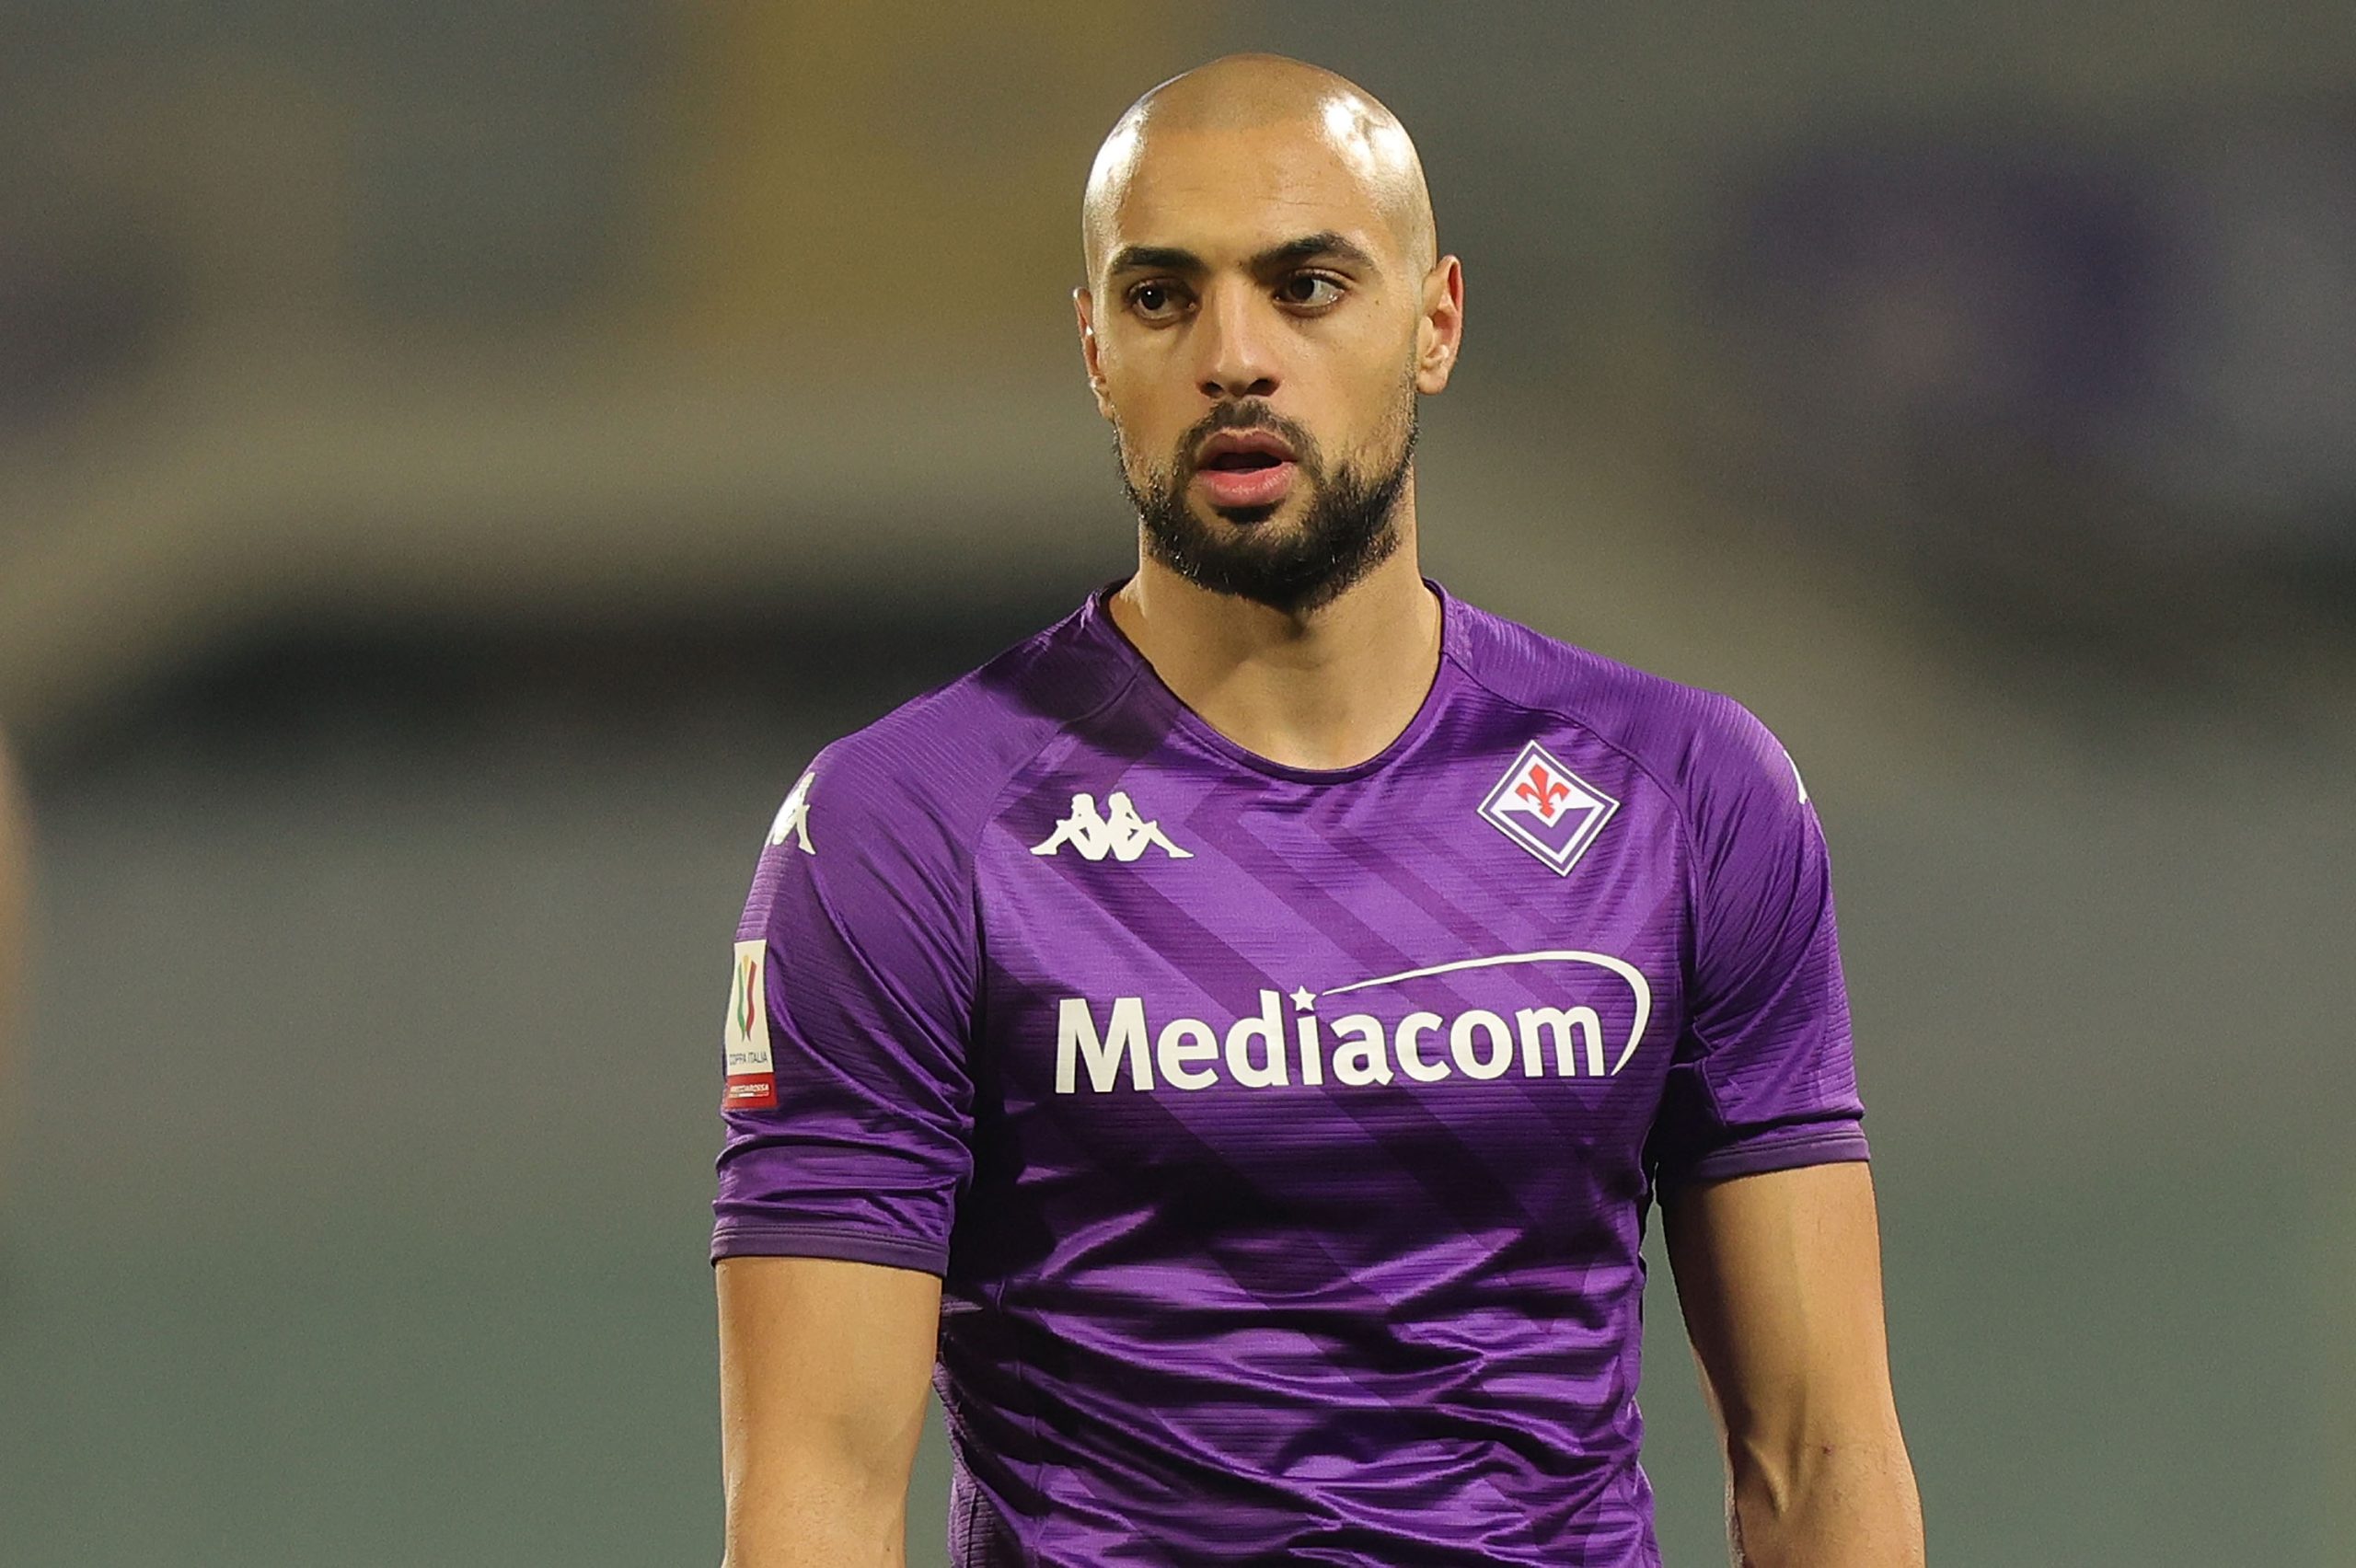 Sofyan Amrabat of ACF Fiorentina looks on during the Coppa Italia Quarter Final matcy between Fiorentina and Torino at Stadio Artemio Franchi on February 1, 2023 in Florence, Italy.